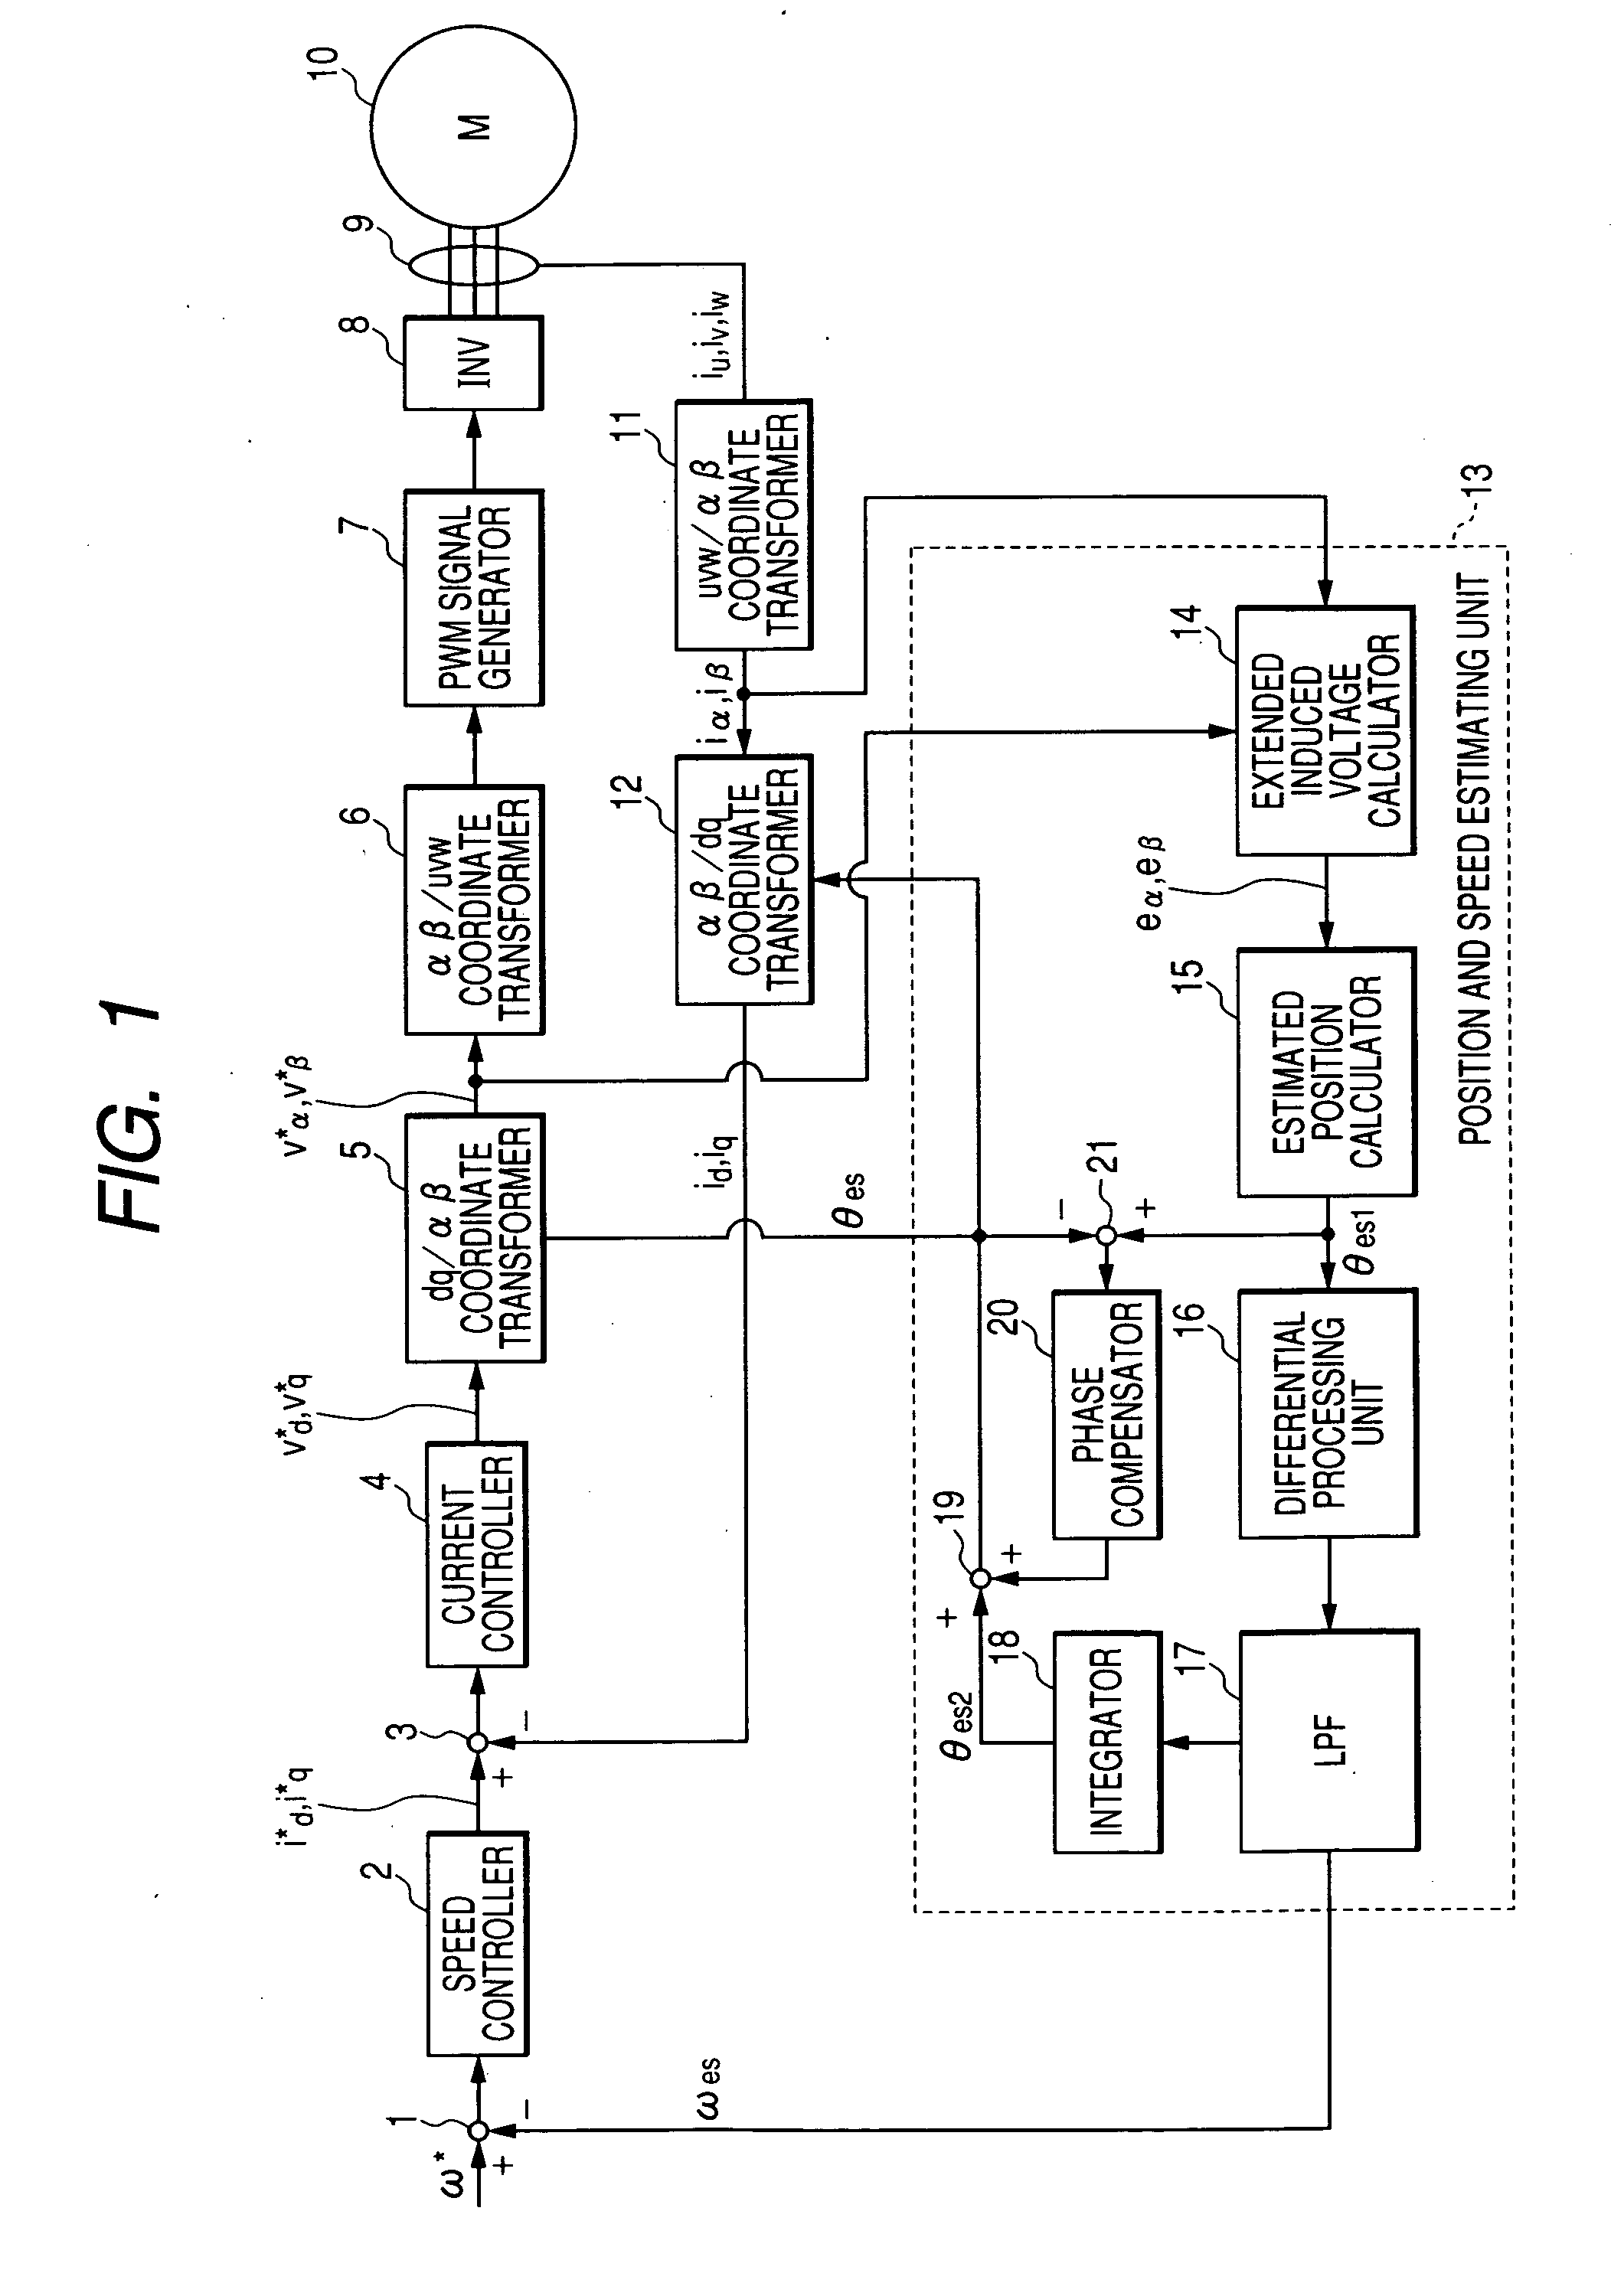 Method of estimating magnetic pole position in synchronous motor